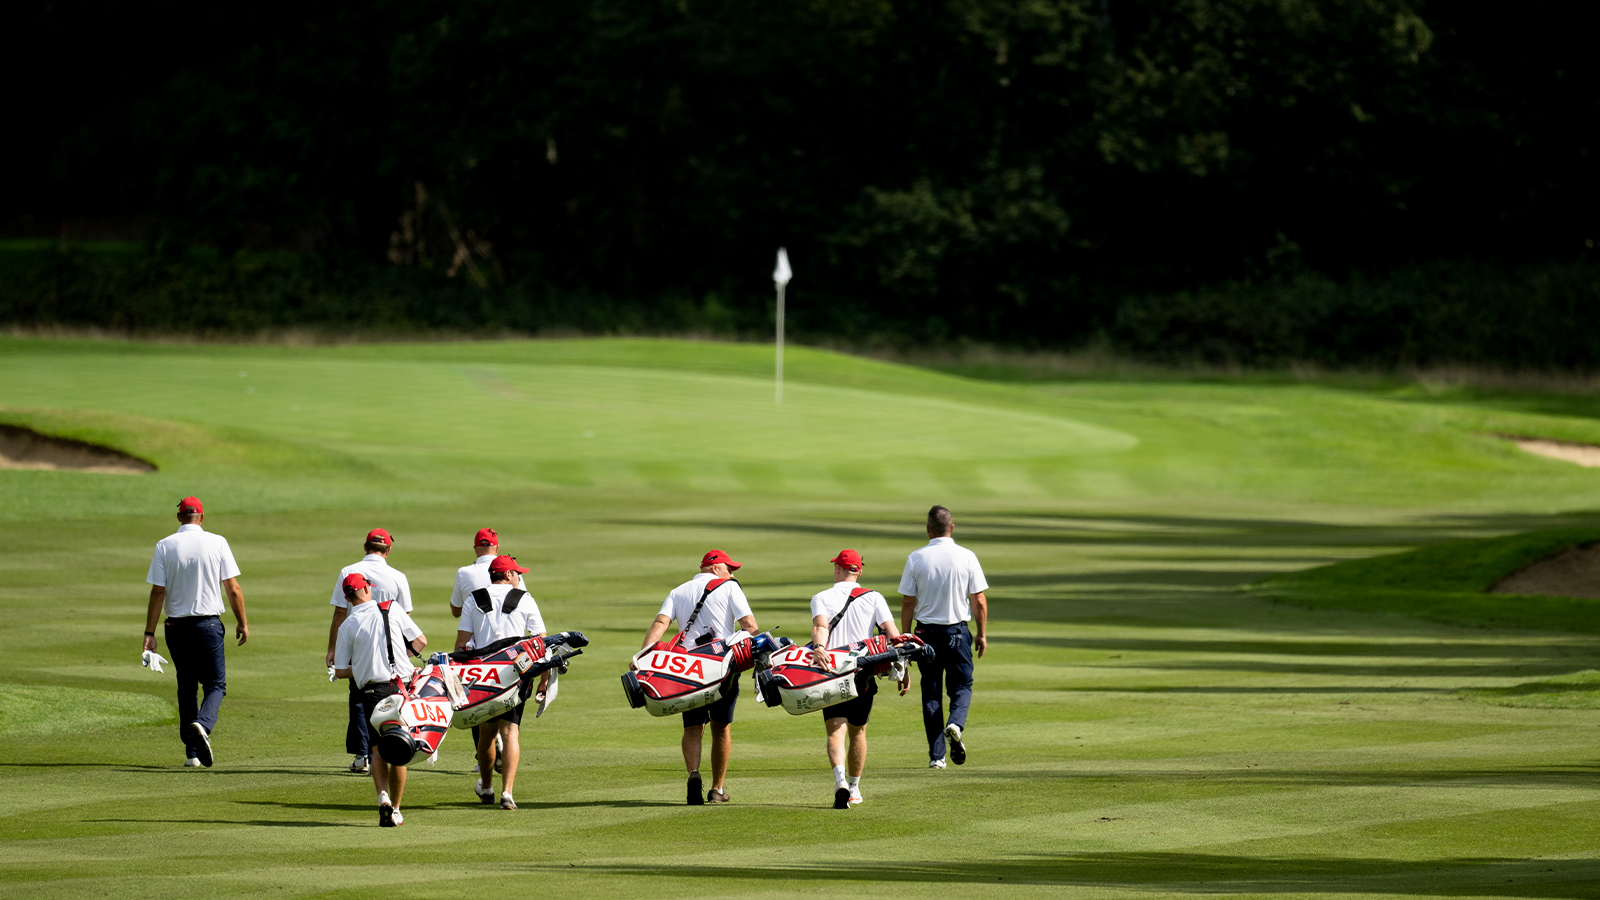 The United States team during the 30th PGA Cup at Foxhills Golf Club on September 14, 2022 in Ottershaw, England. (Photo by Matthew Harris/PGA of America)